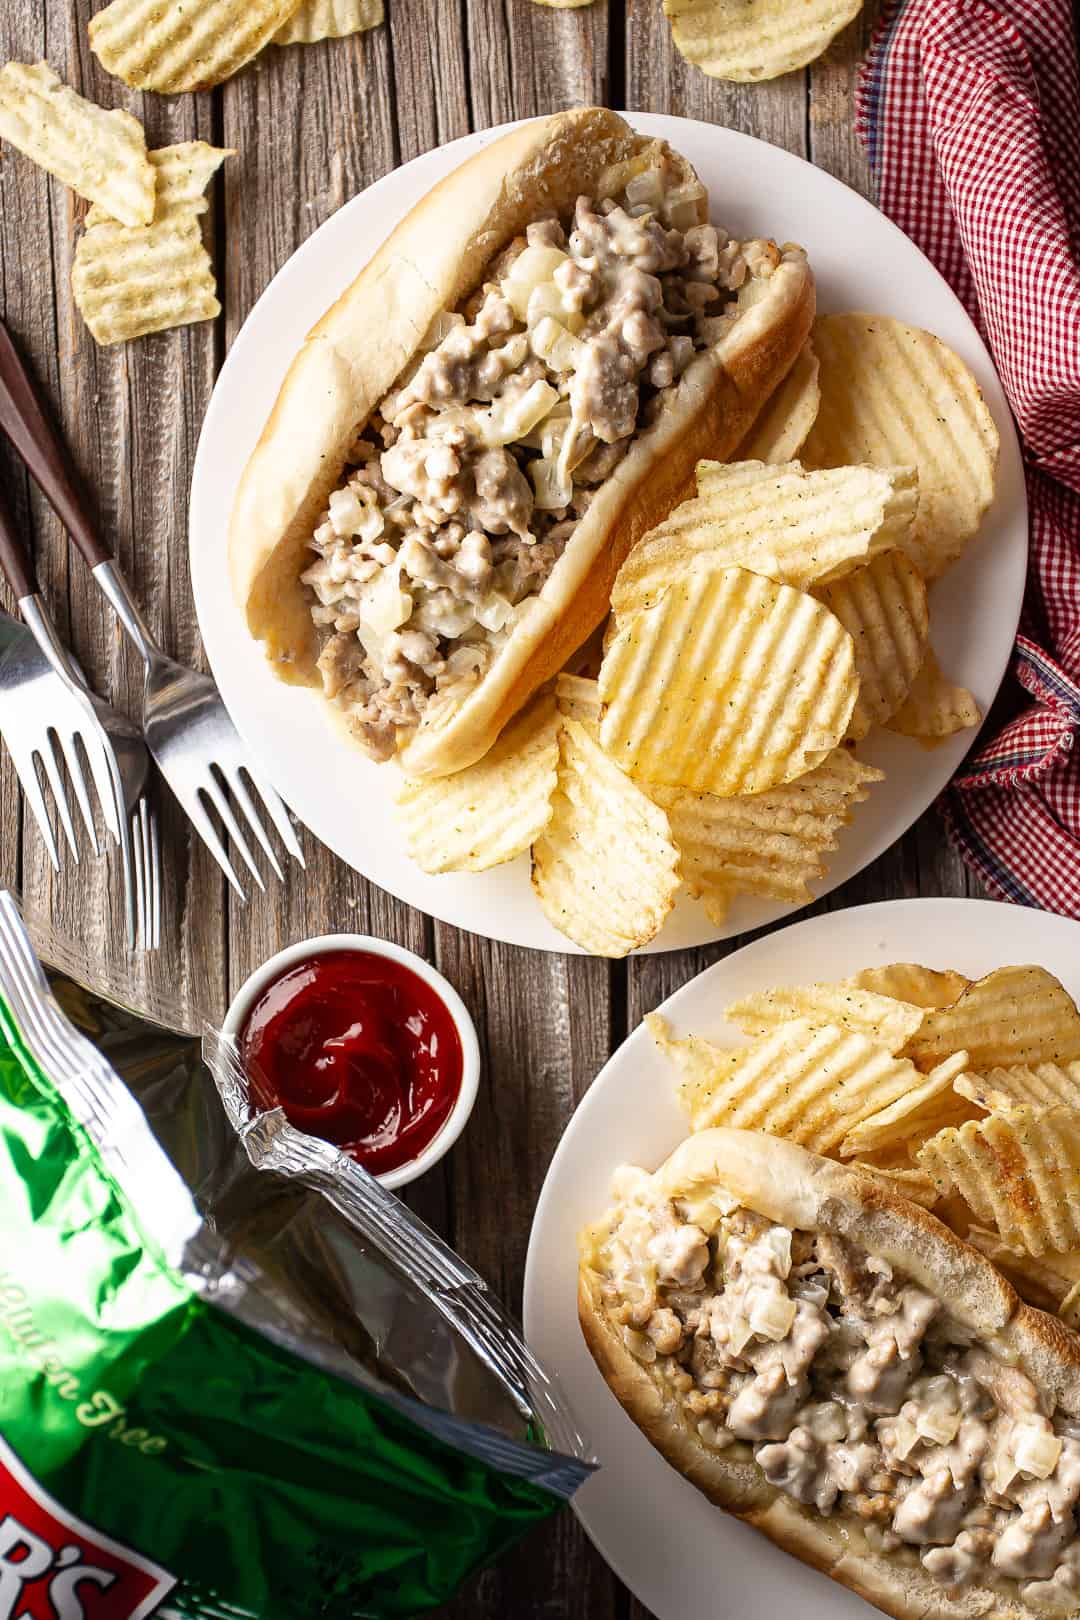 Chicken cheese steaks served with chips on a distressed wooden tabletop.